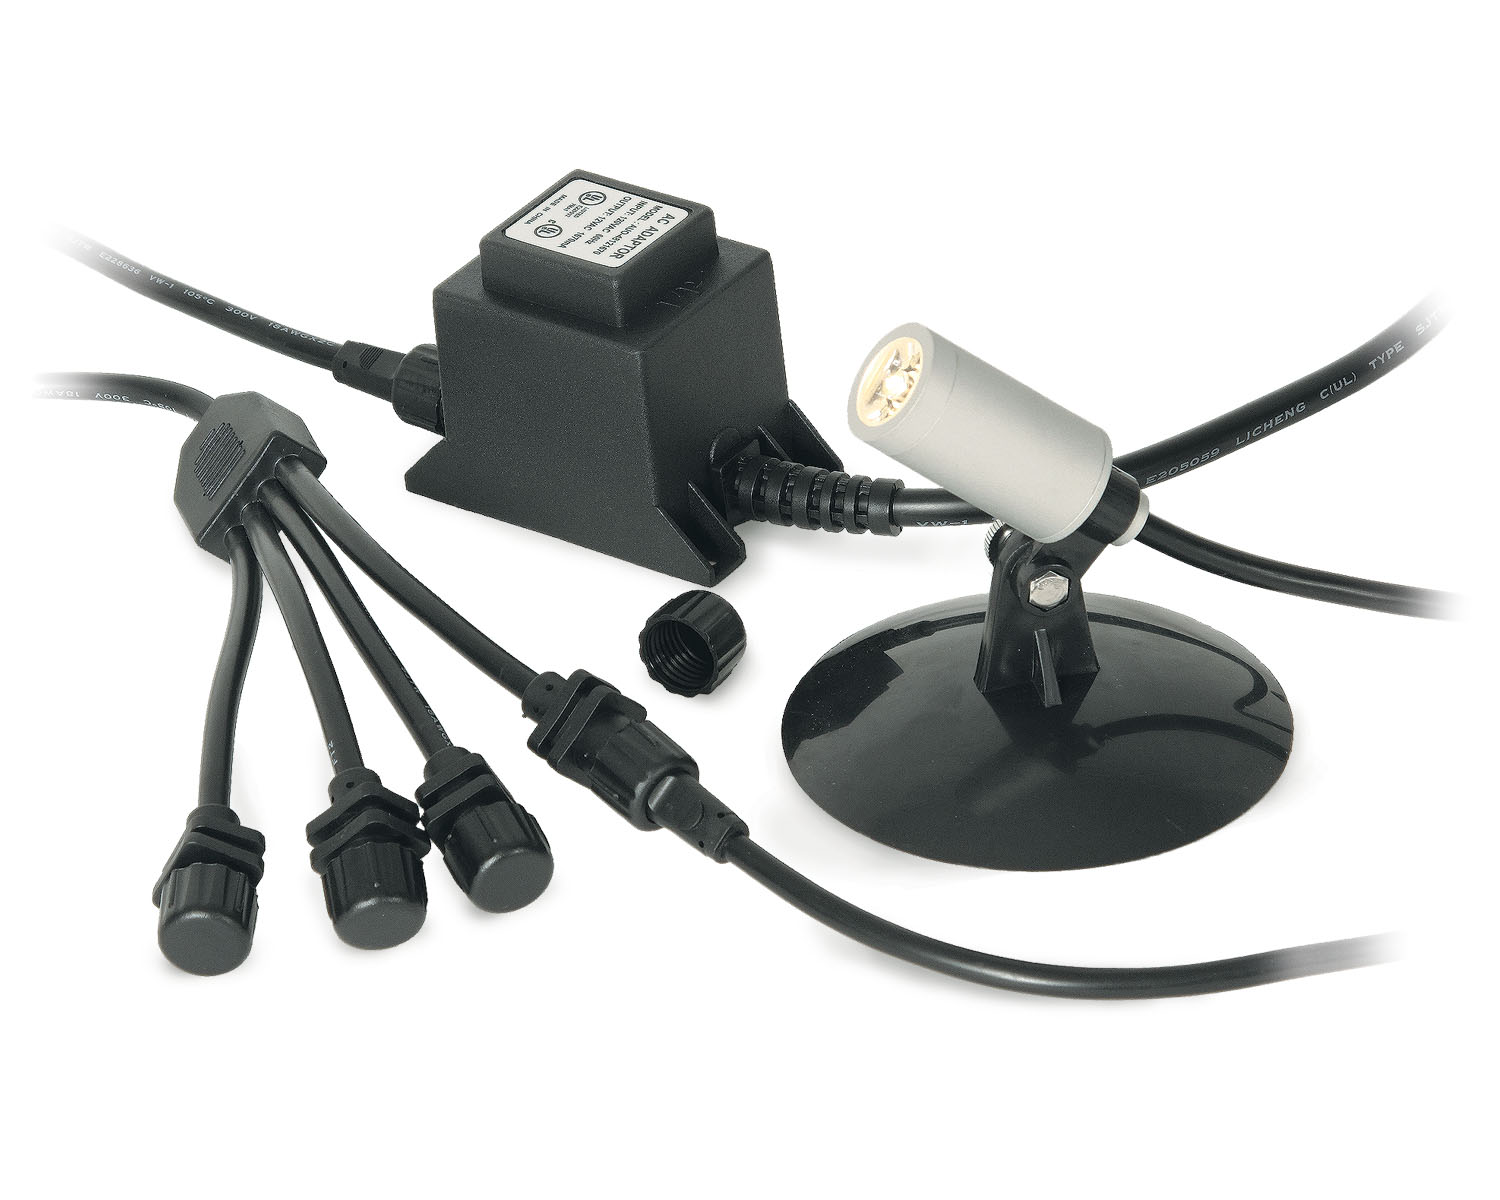 LED Pond Lights Pro Series Kit : Best prices and selection of Pond Supplies & Wholesale to the Trade. Featuring Pond Pumps, Submersible Pumps, Fountain Pumps, Pond Liner,